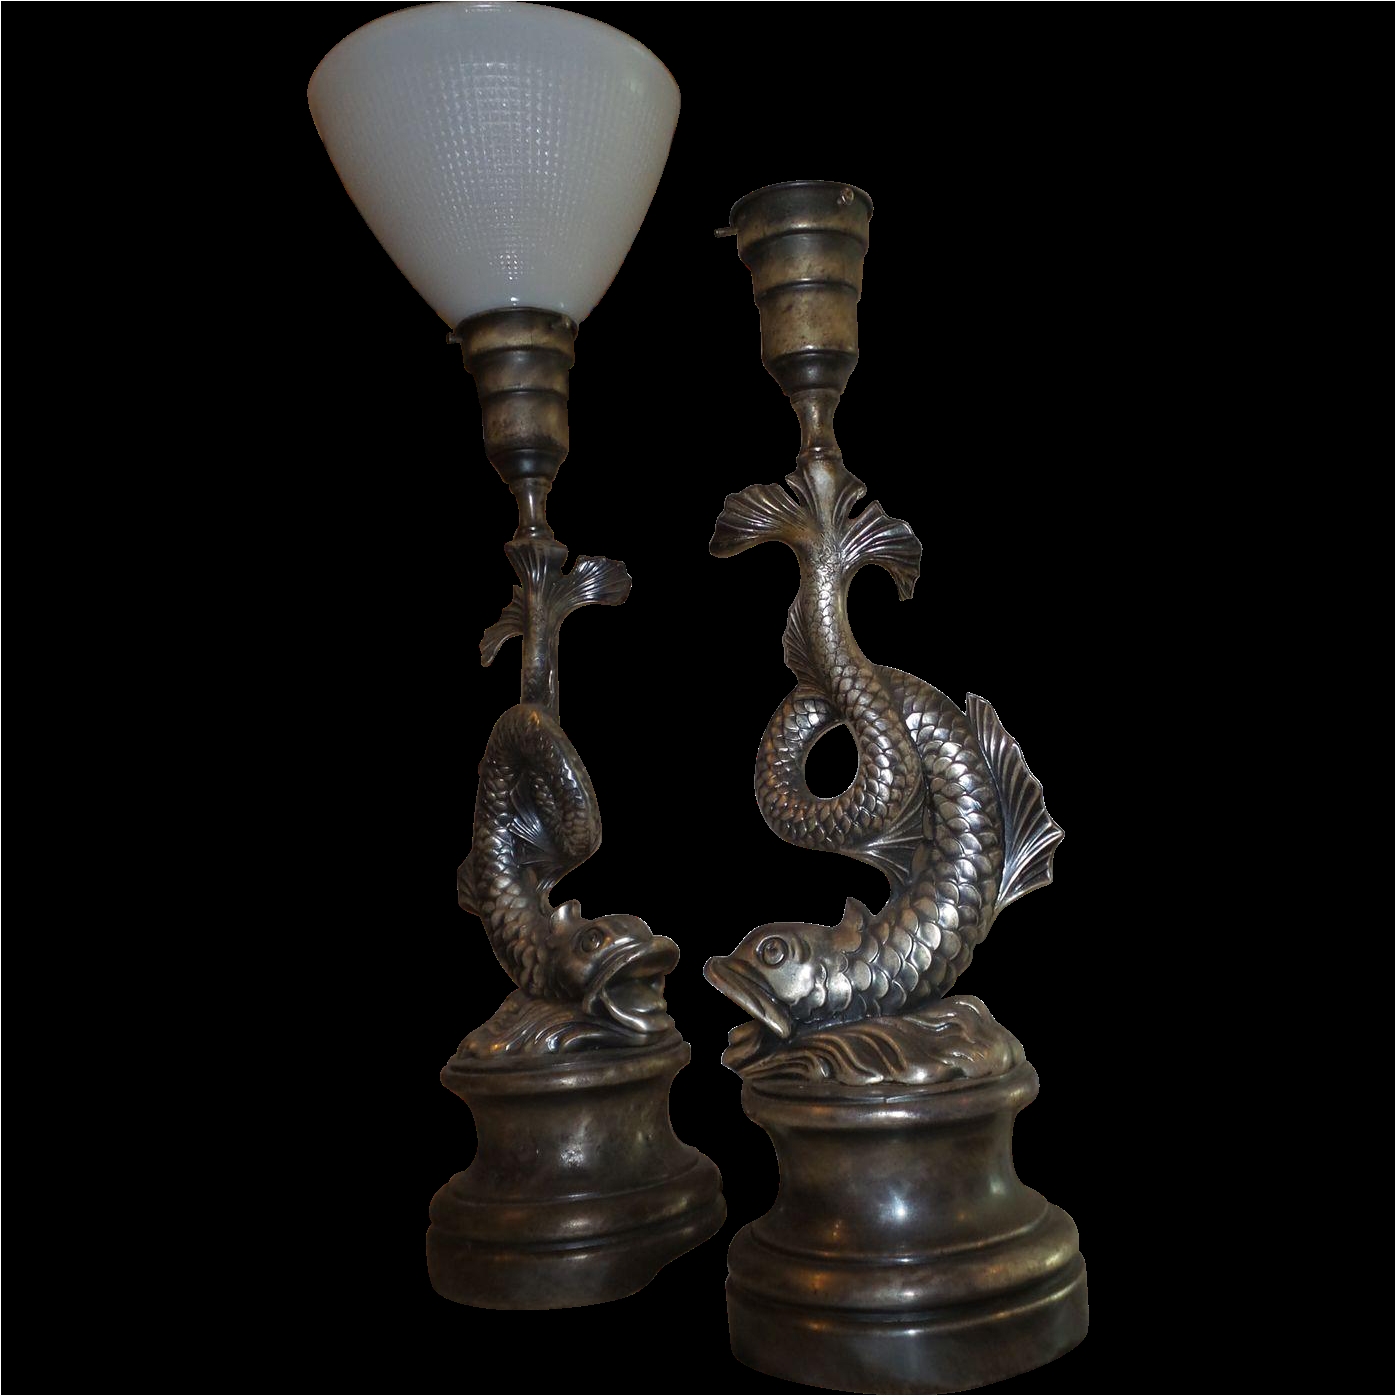 vintage french made 1920s pair of dolphin shaped lamps in silver tone from pearlgirls on ruby lane